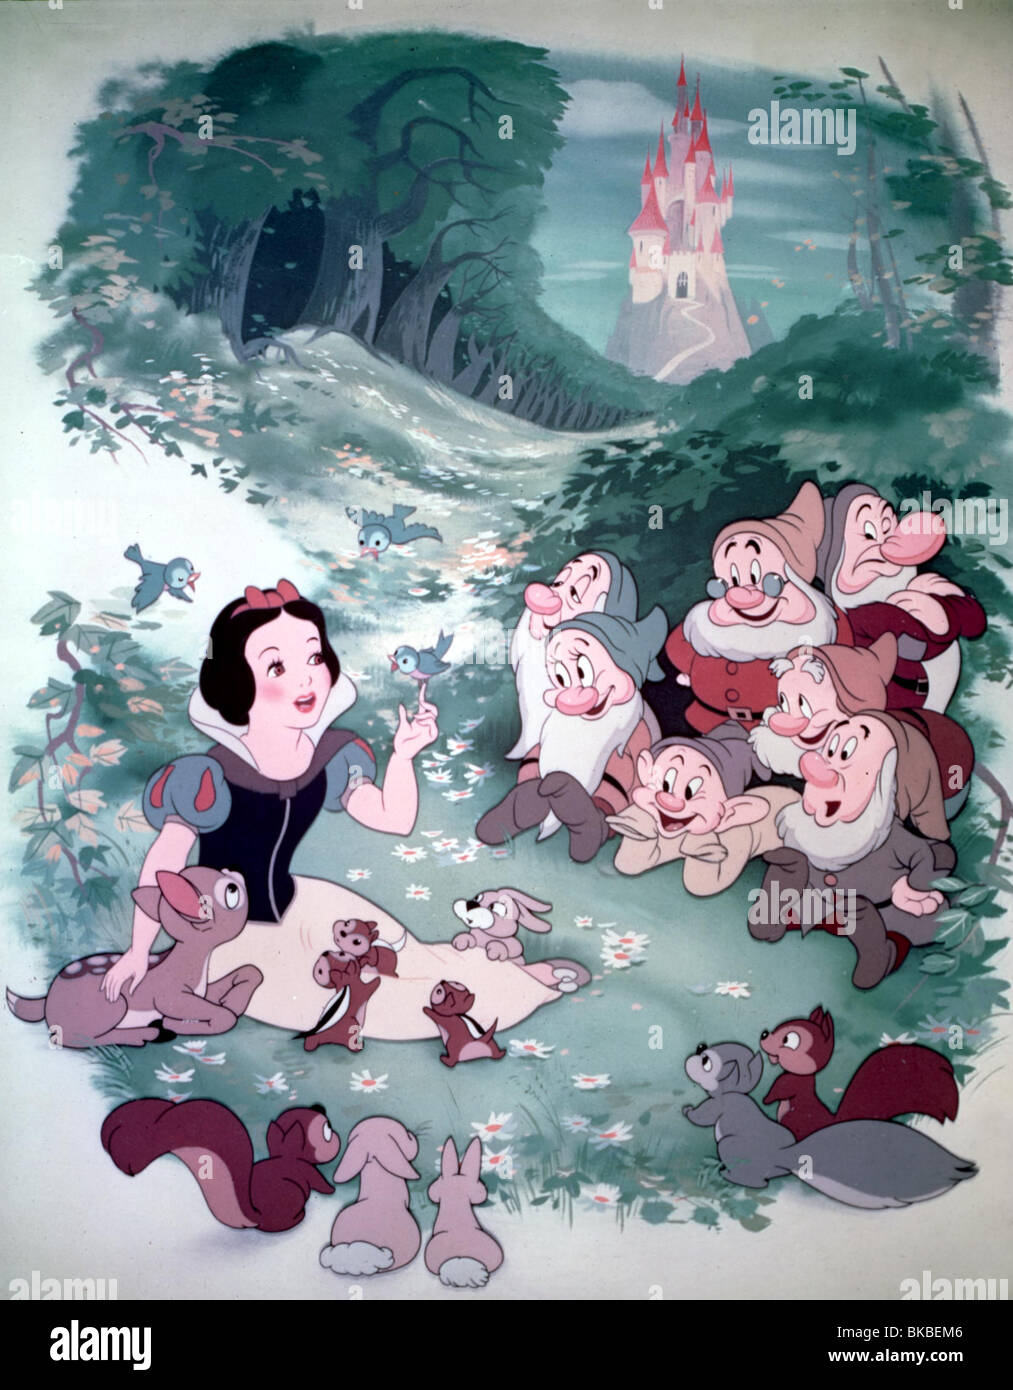 SNOW WHITE AND THE SEVEN DWARFS (1937) ANIMATED CREDIT DISNEY SSNW 008 OS Stock Photo